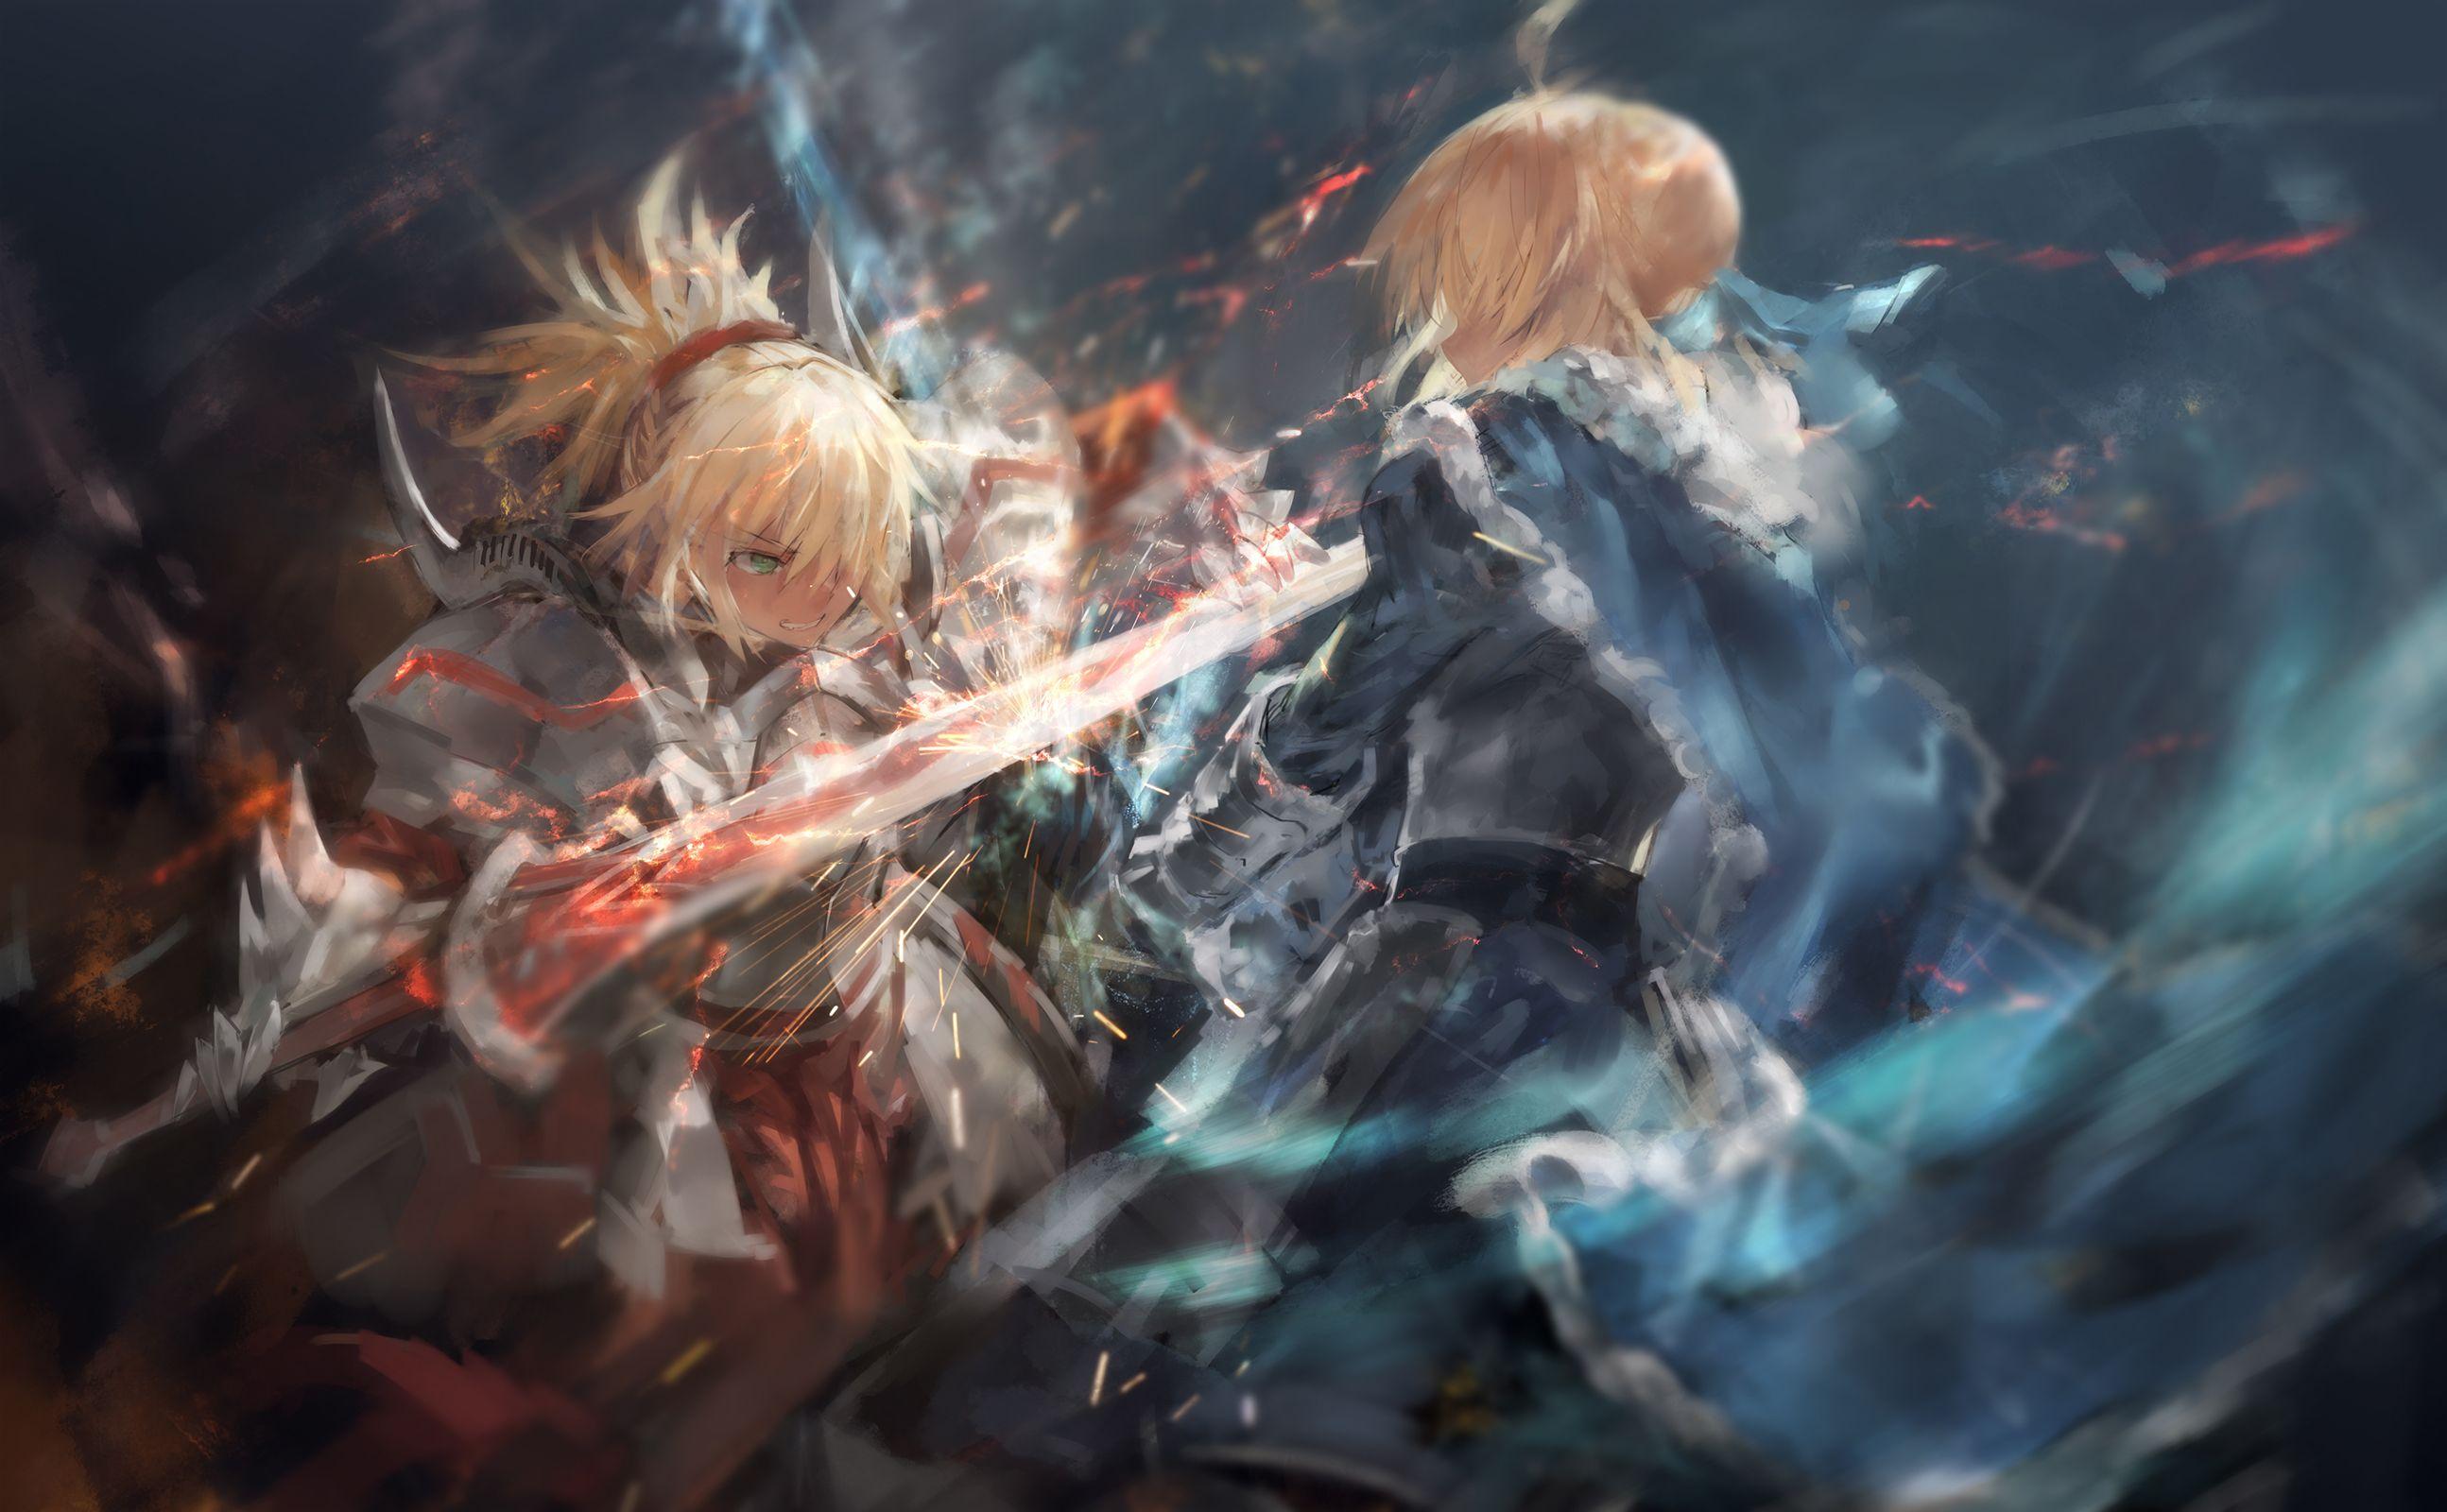 Fate Wallpapers Wallpaper Cave